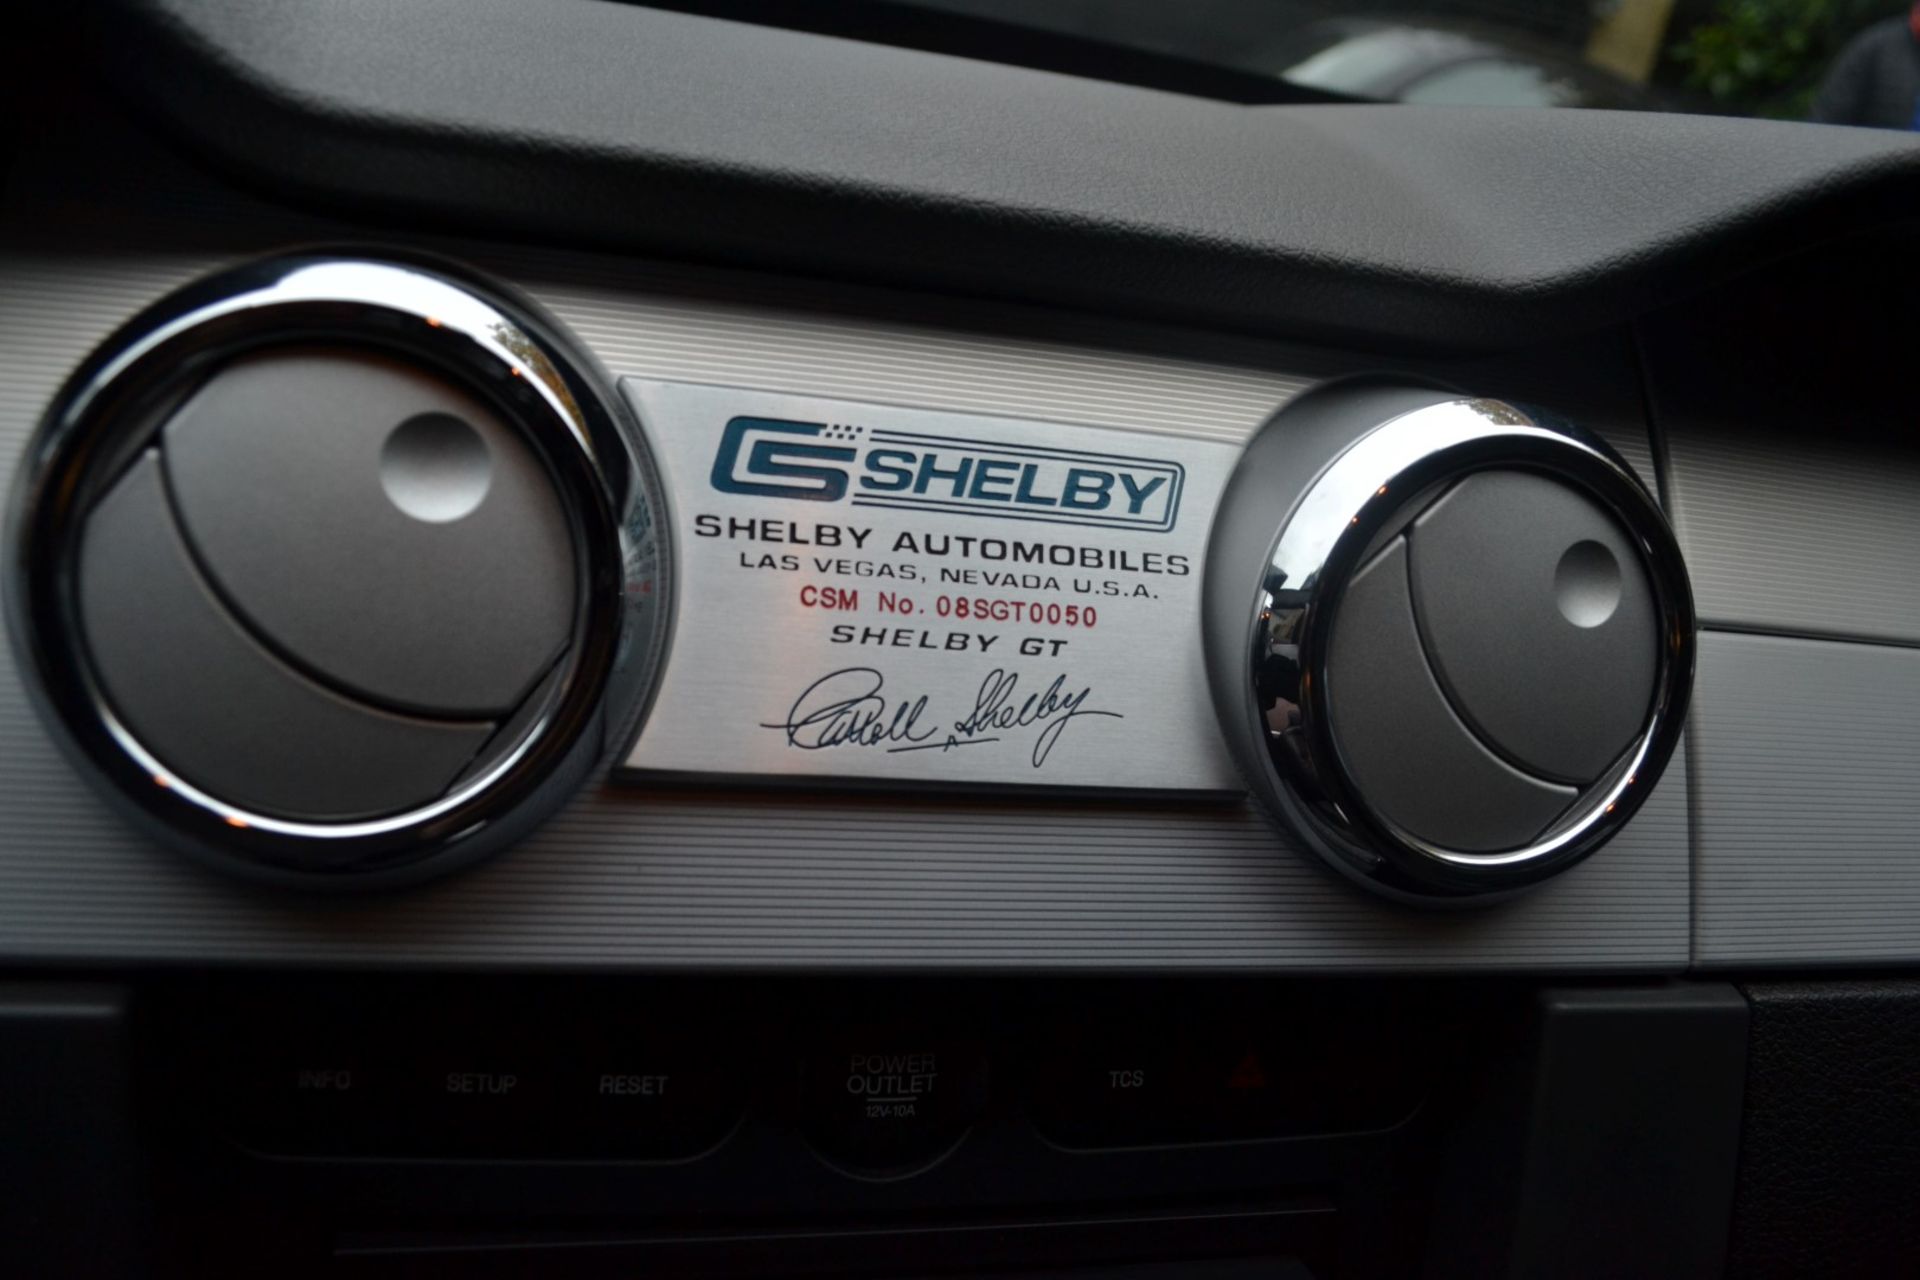 Limited Edition Supercharged 2008 Shelby Ford Mustang GT-C - 2136 Miles - No VAT on the hammer - Image 23 of 64